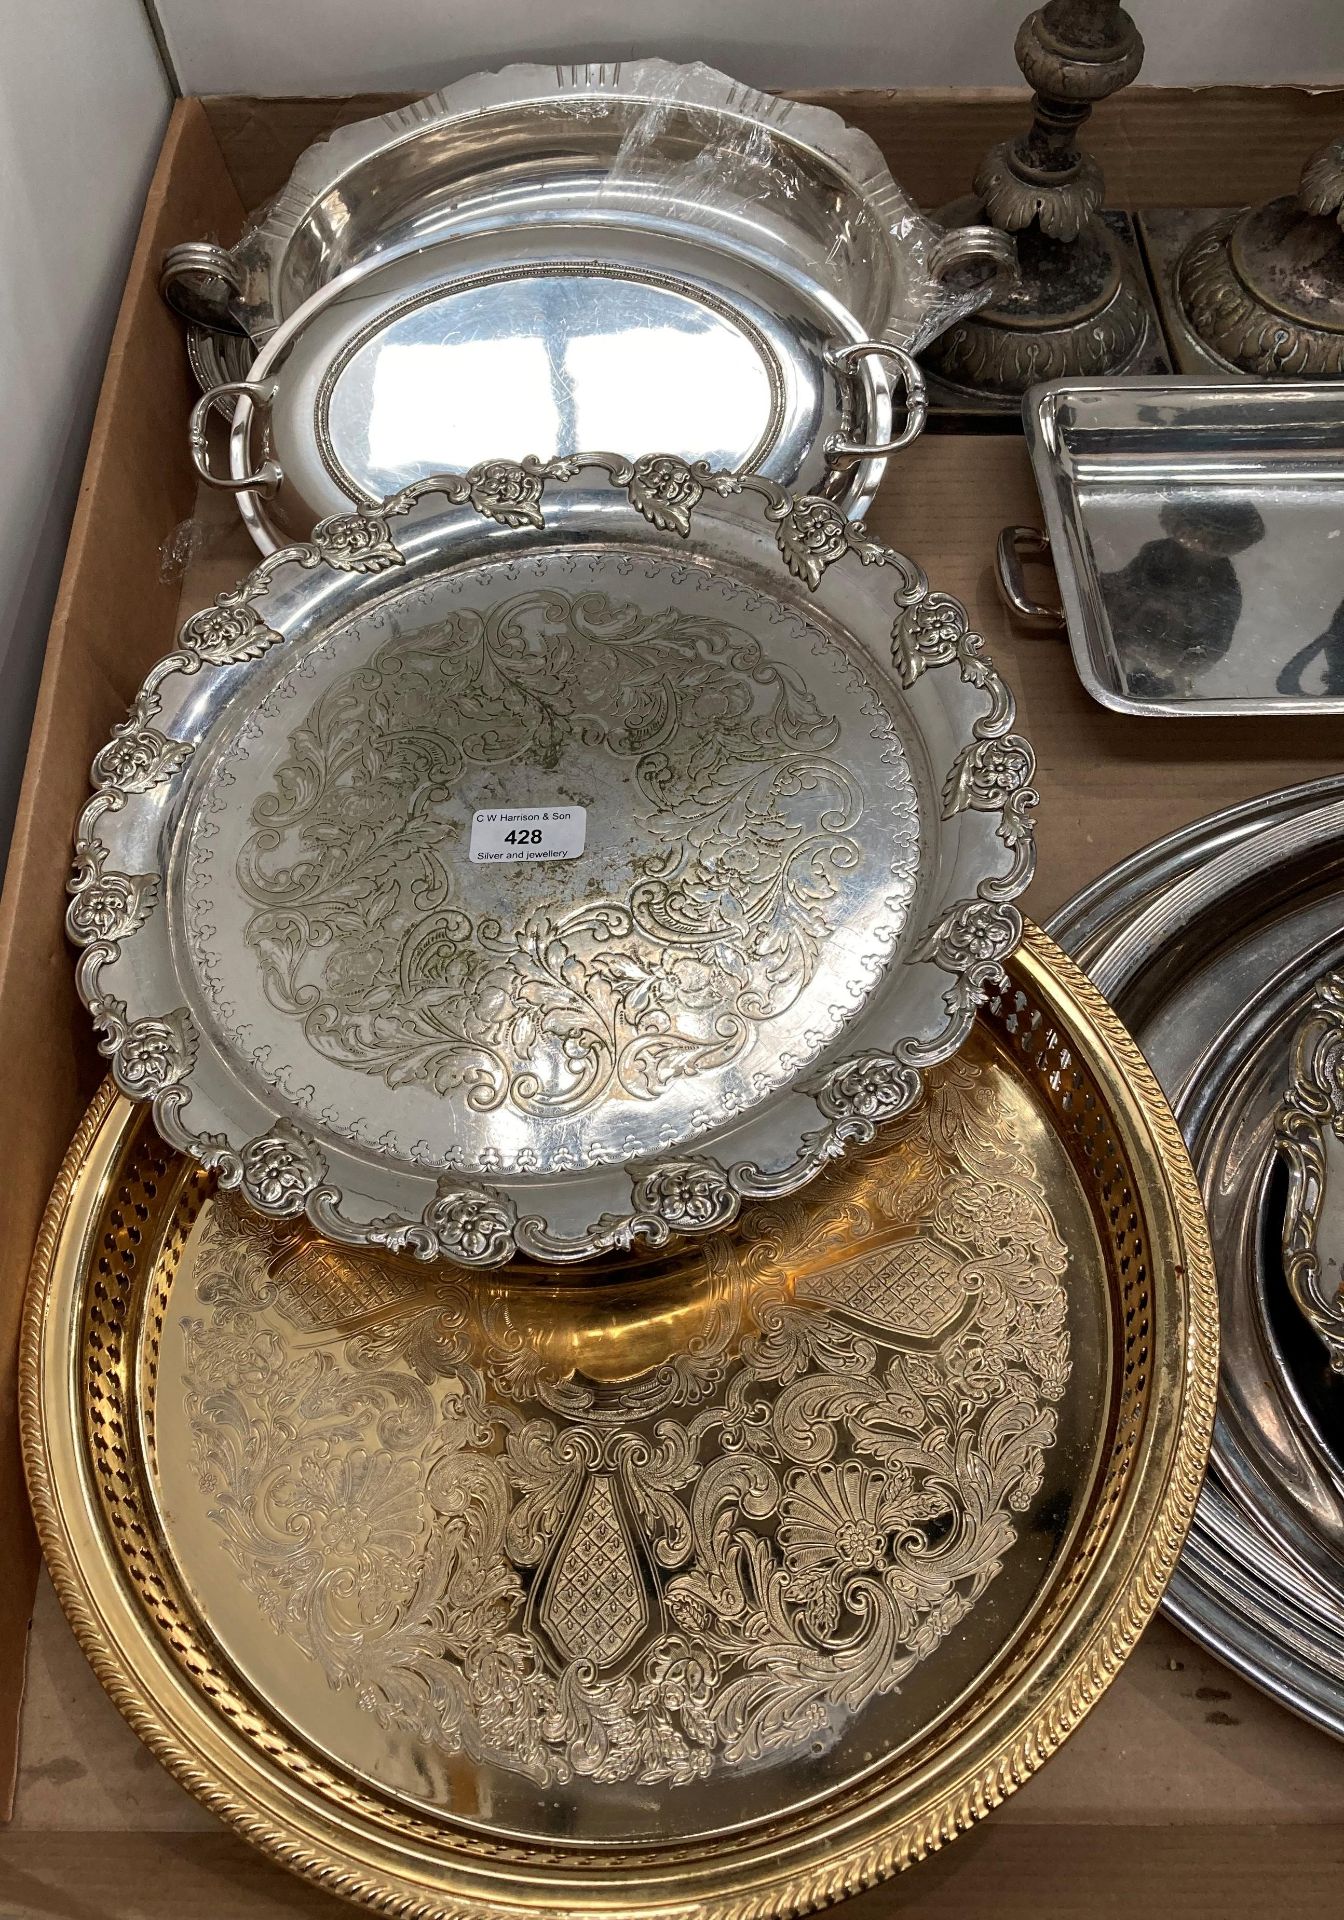 Contents to tray - assorted silver plated items including trays, trophies, - Image 2 of 4